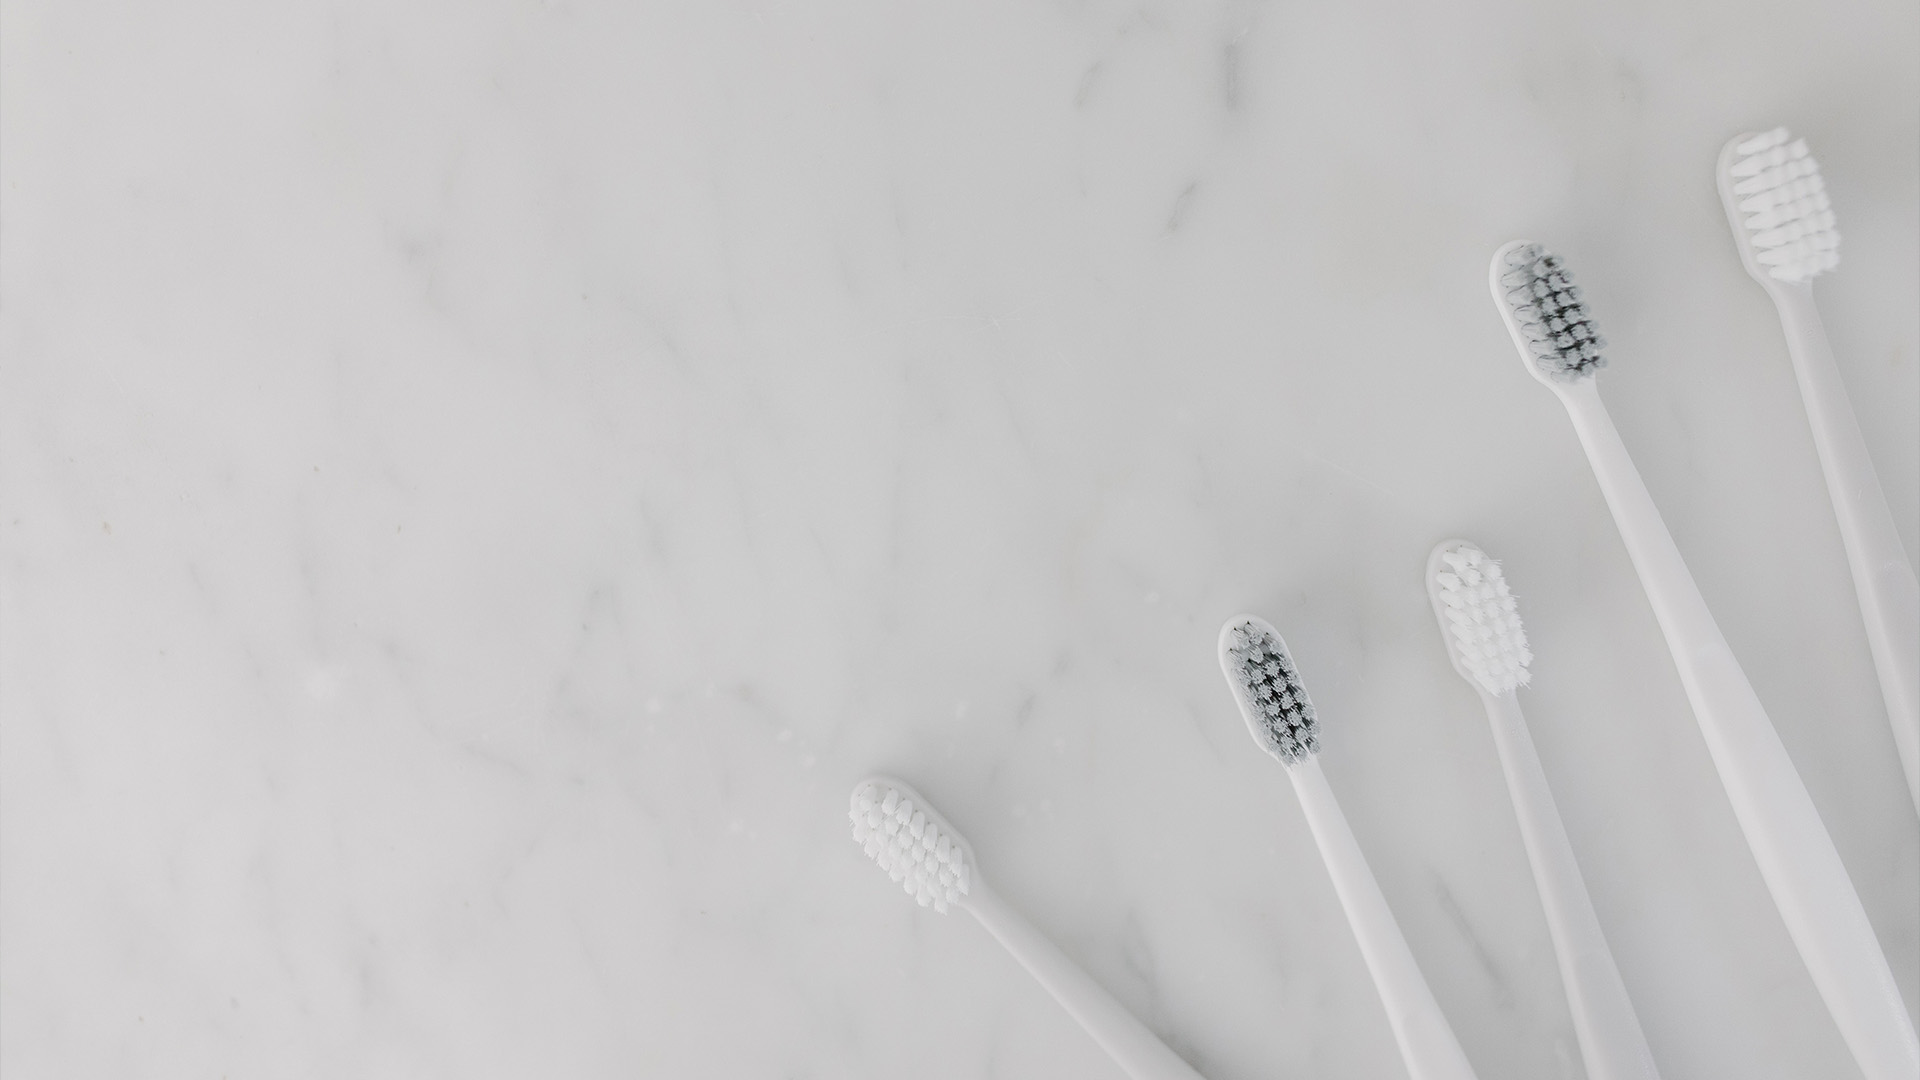 Toothbrushes on marble counter